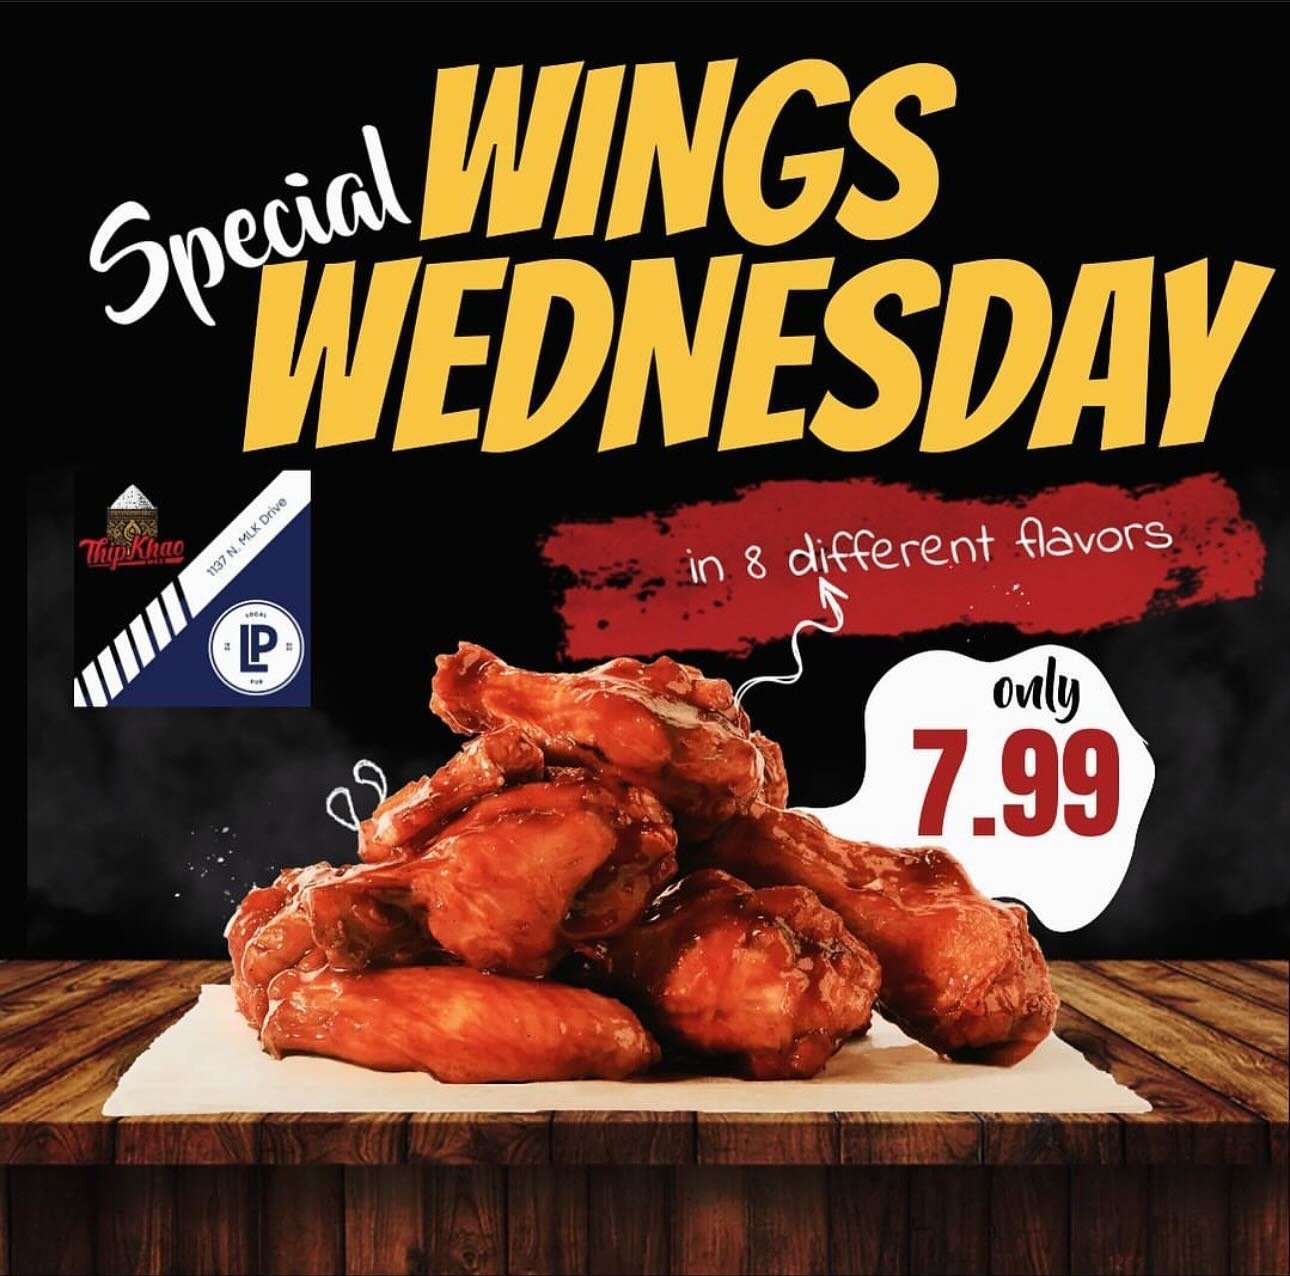 You know the drill!

Wing Wednesday! We are open. Come down and enjoy some signs with our many happy hour specials!